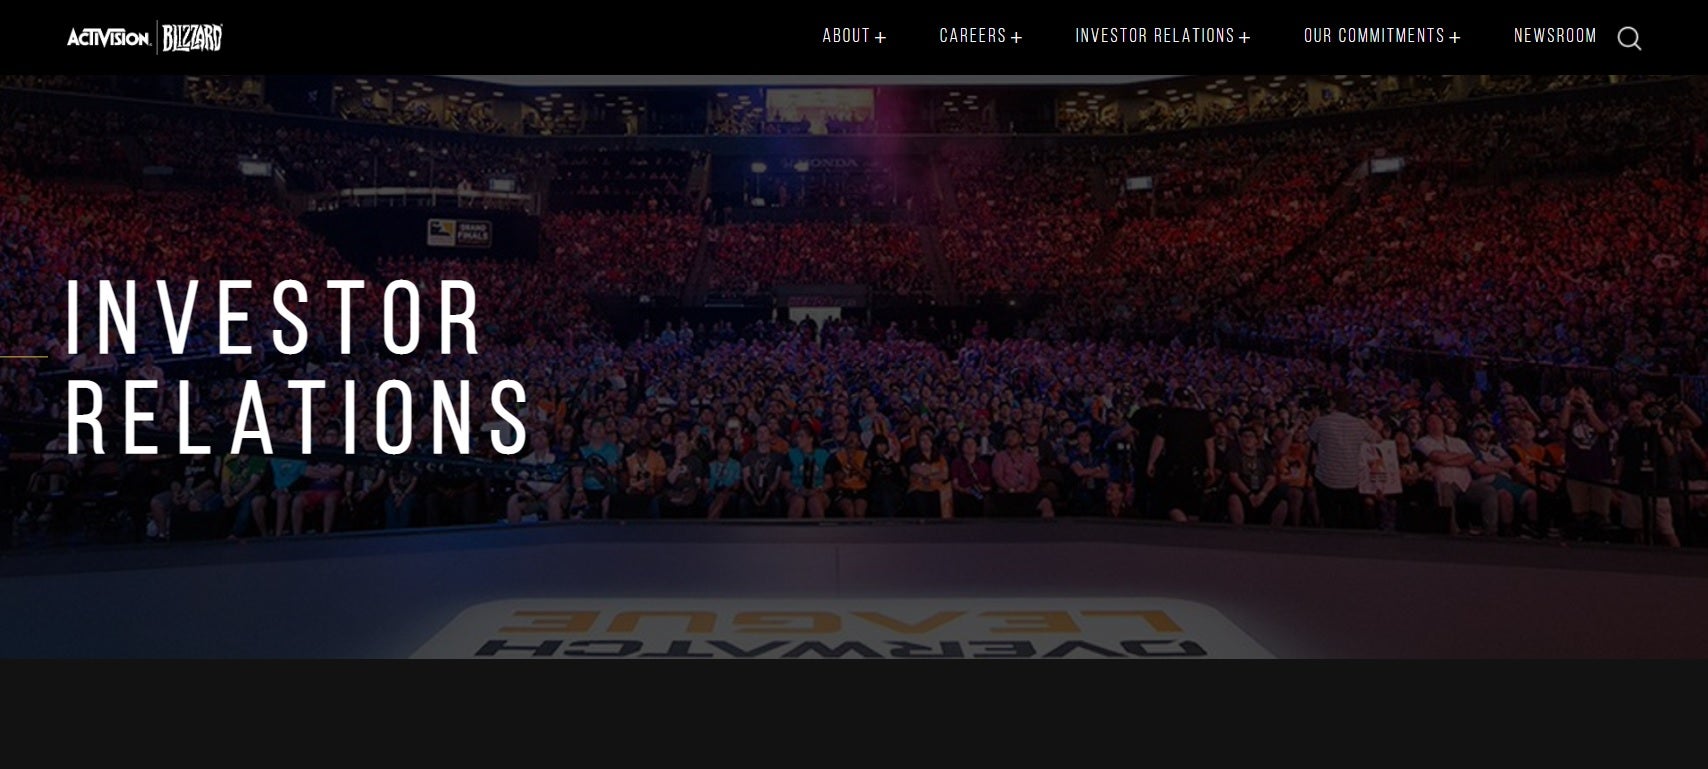 Activision Blizzard's IR site, with the words "INVESTOR RELATIONS" in front of a picture of an Overwatch League crowd. There's no other information on the screen.